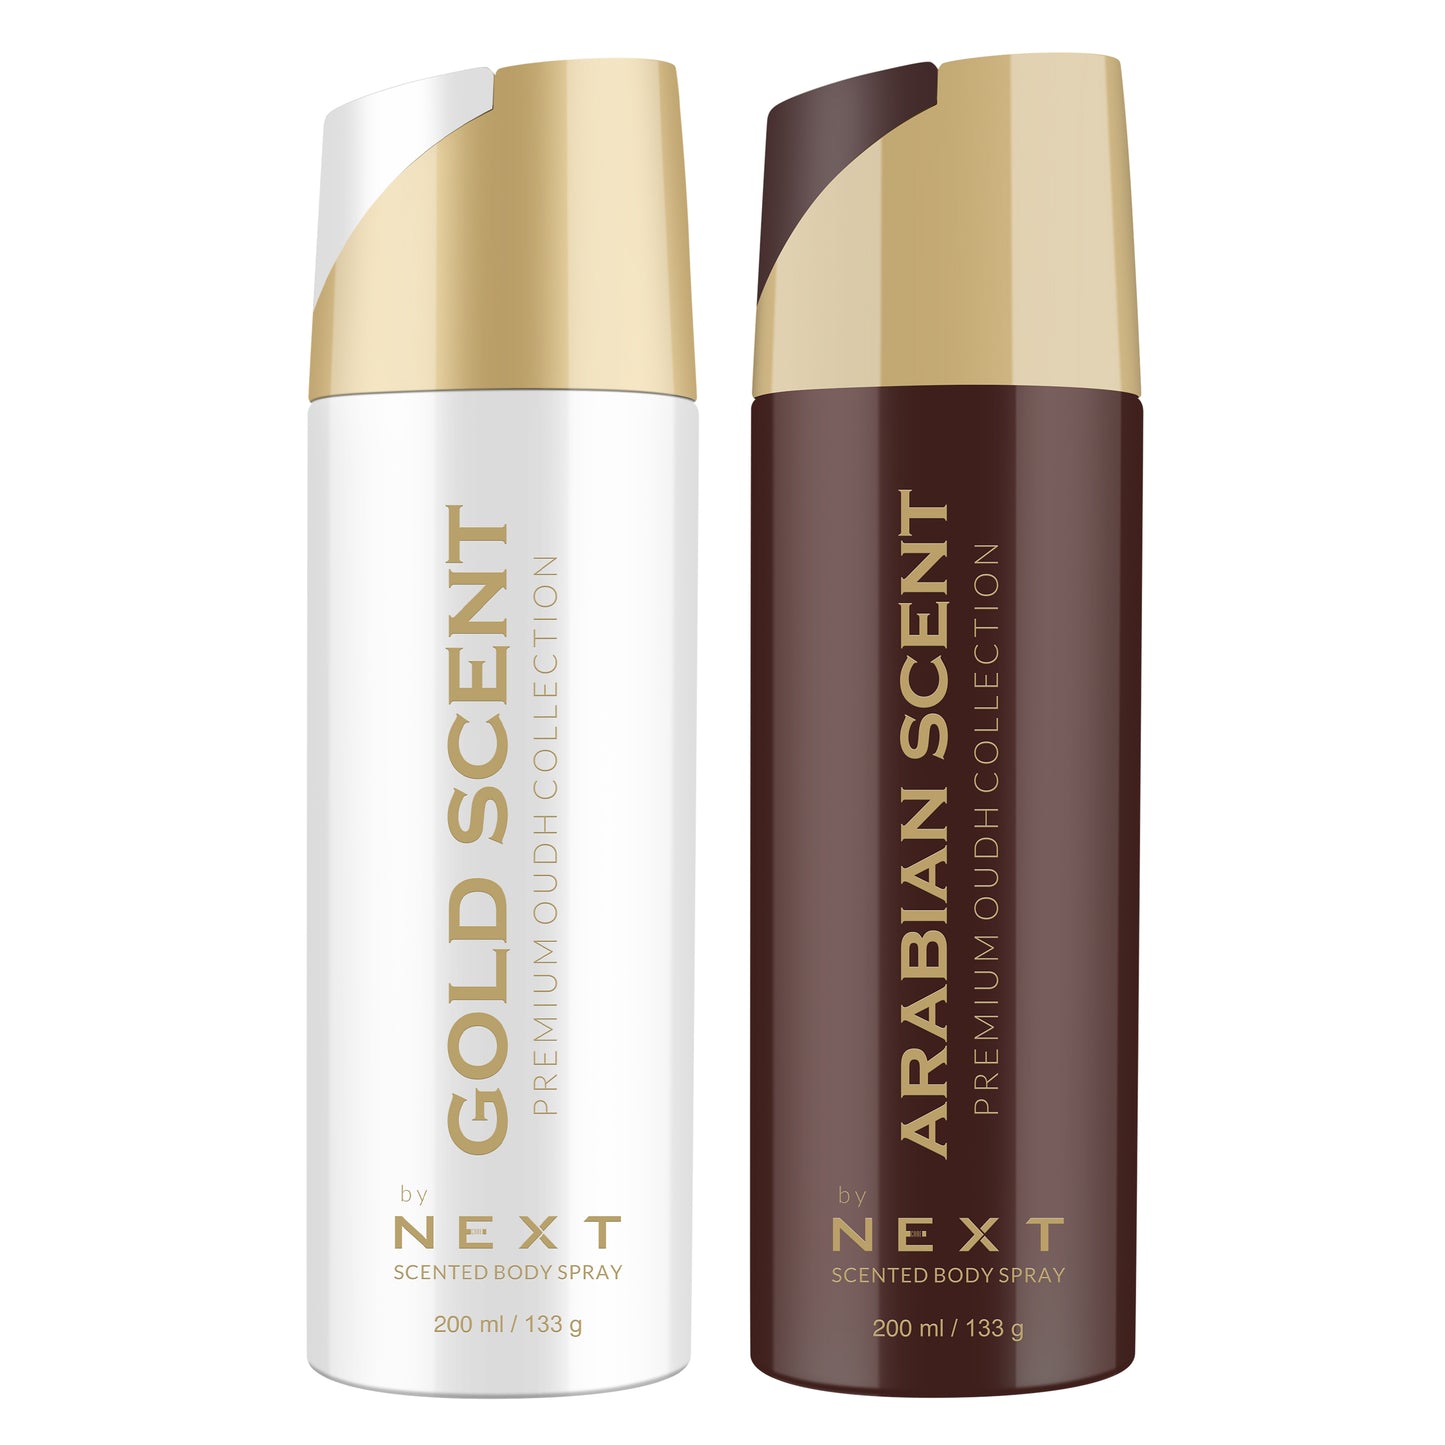 Combo Pack of 2 Next Scented Body Spray -Gold Scent & Arabian Scent - 200 ML Each - For Men and Women